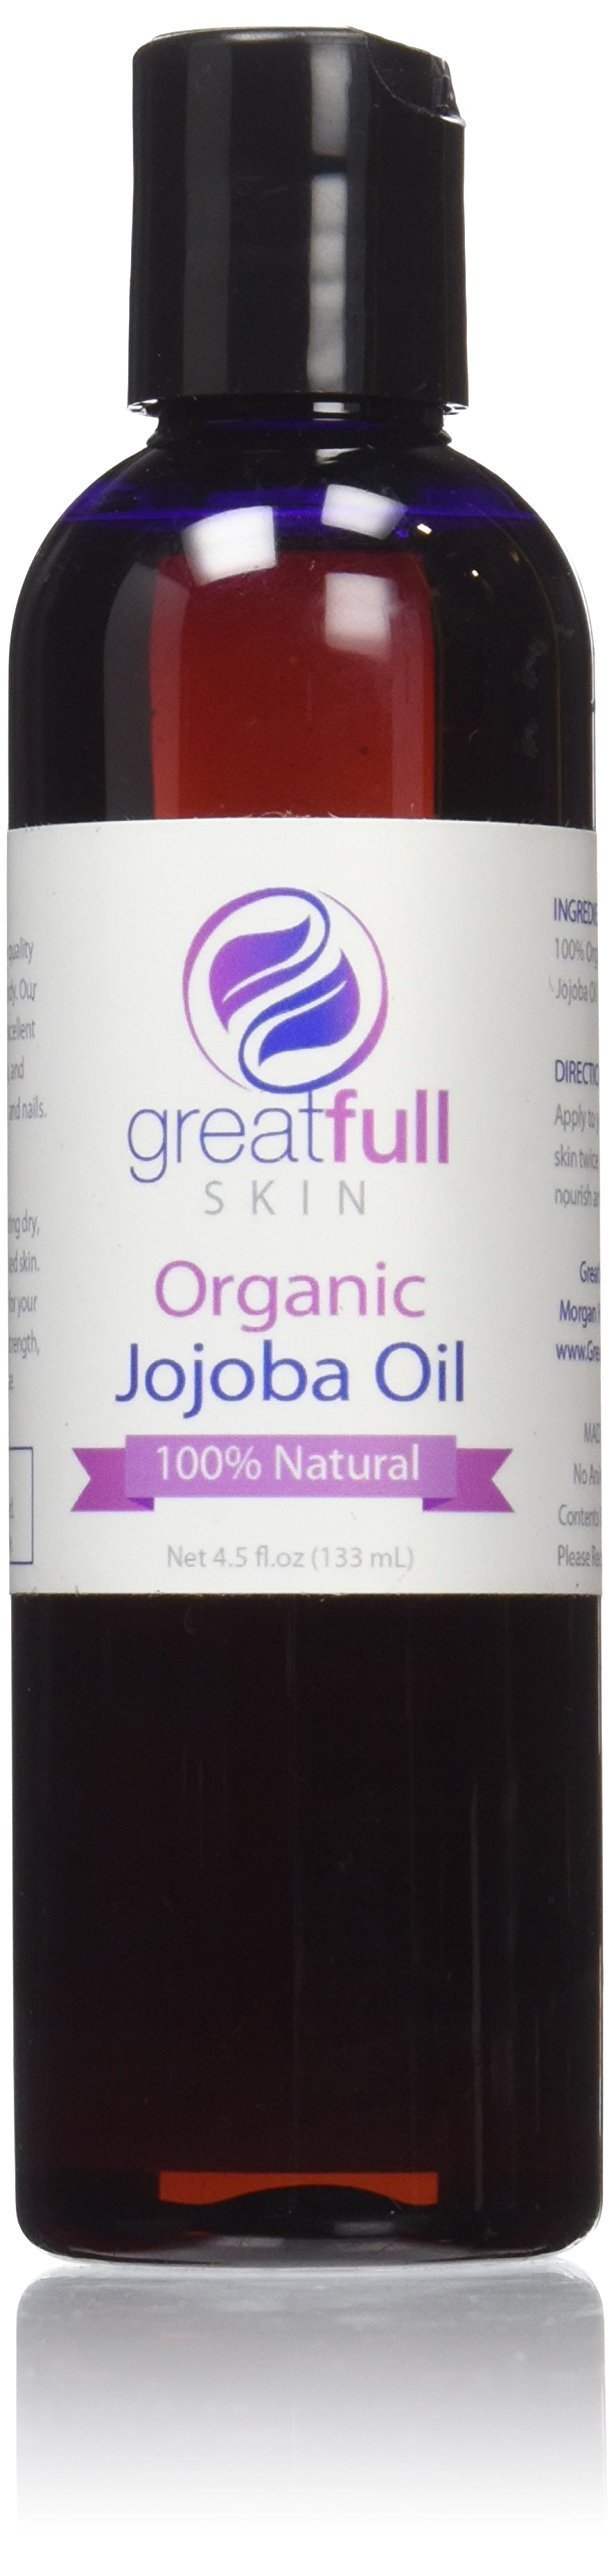 GreatFull Skin Golden Jojoba Oil is a Premium 100% Pure Certified Organic Cold Pressed Unrefined Extract - More Effective Than Argan Without The Odor, 4.5 oz - BeesActive Australia